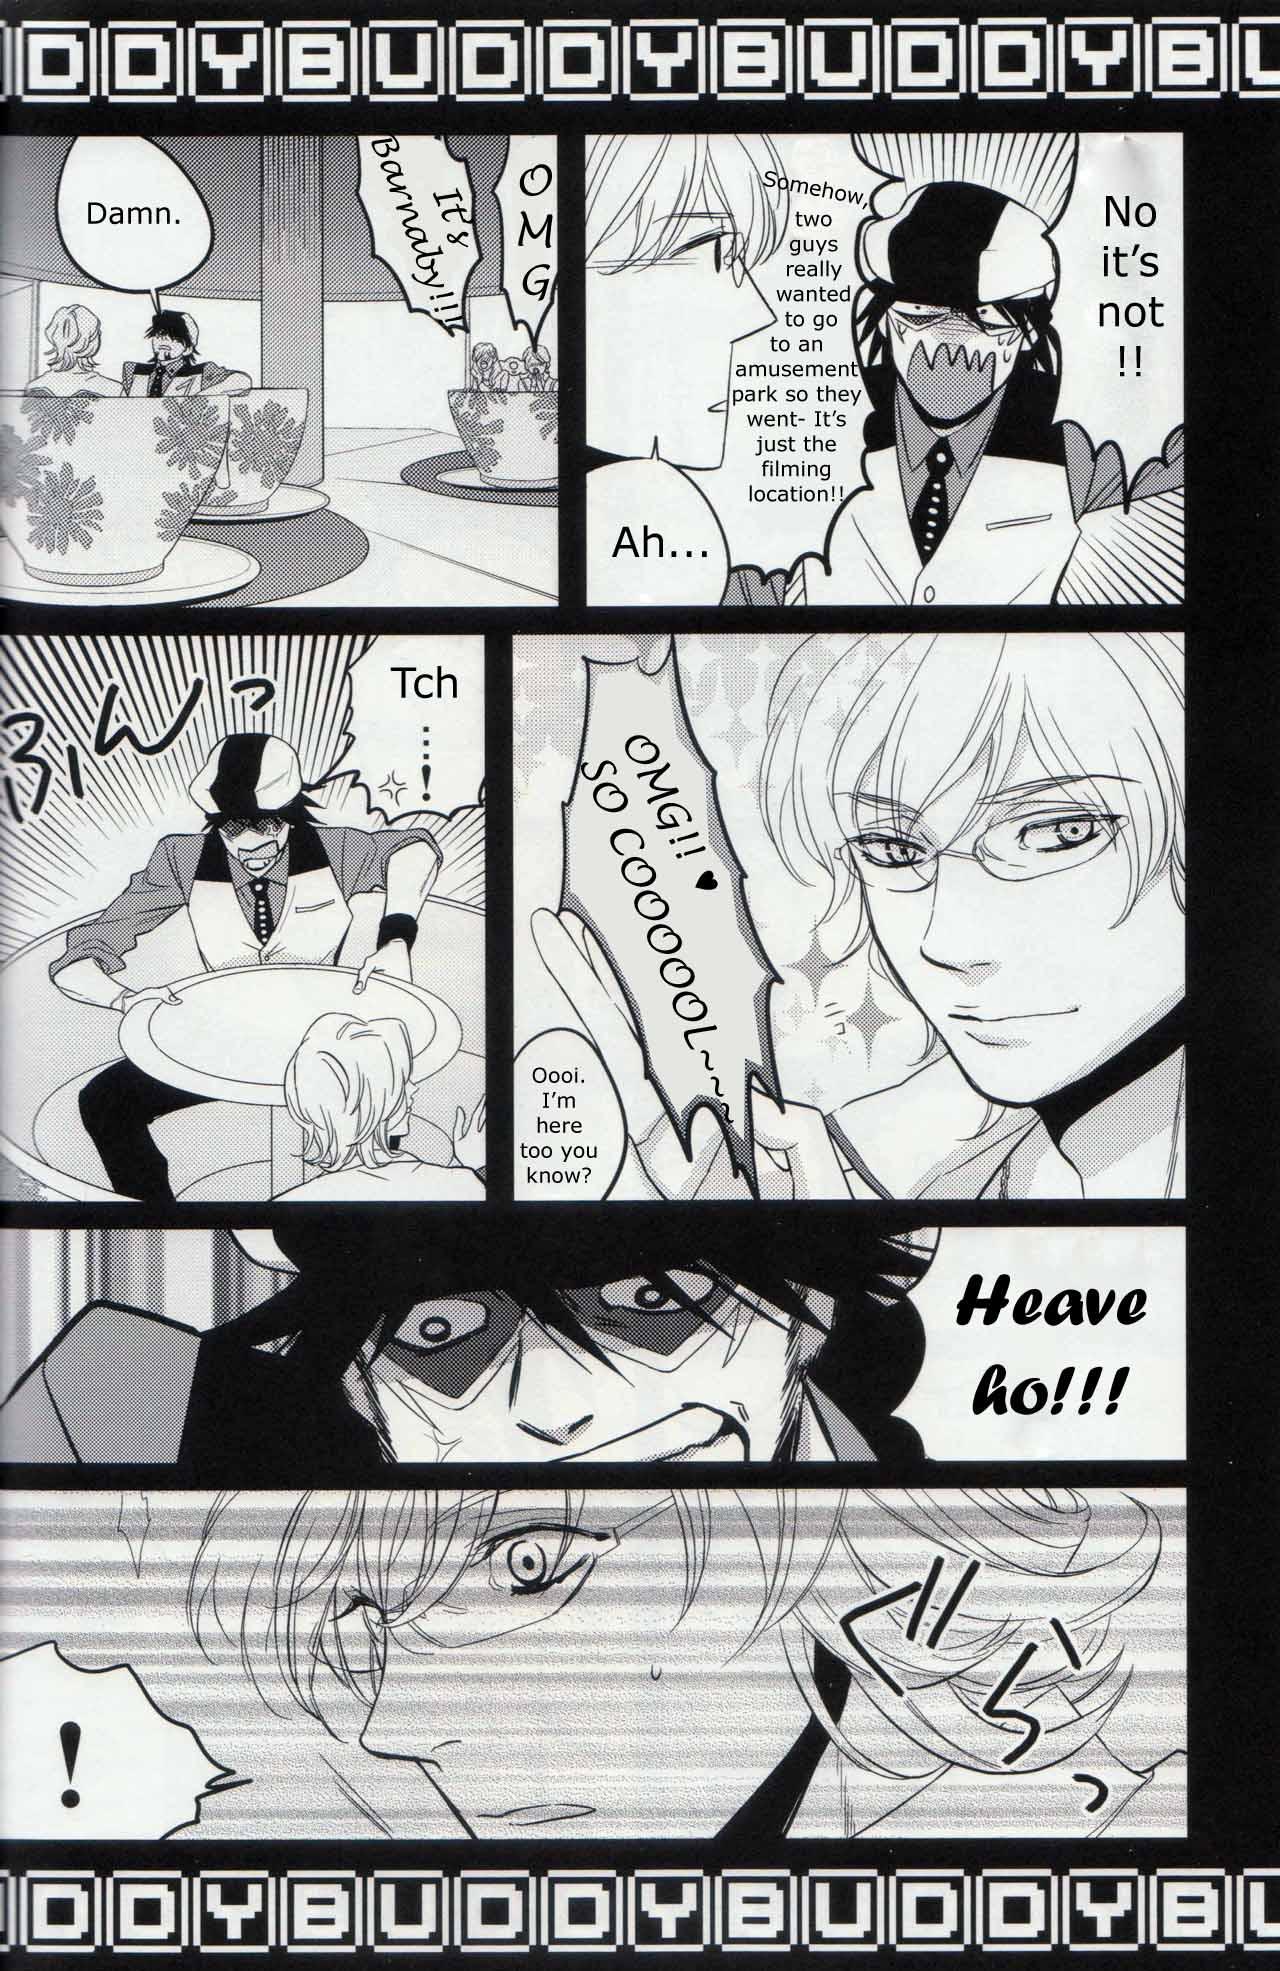 Upskirt Buddy - Tiger and bunny Prostituta - Page 8